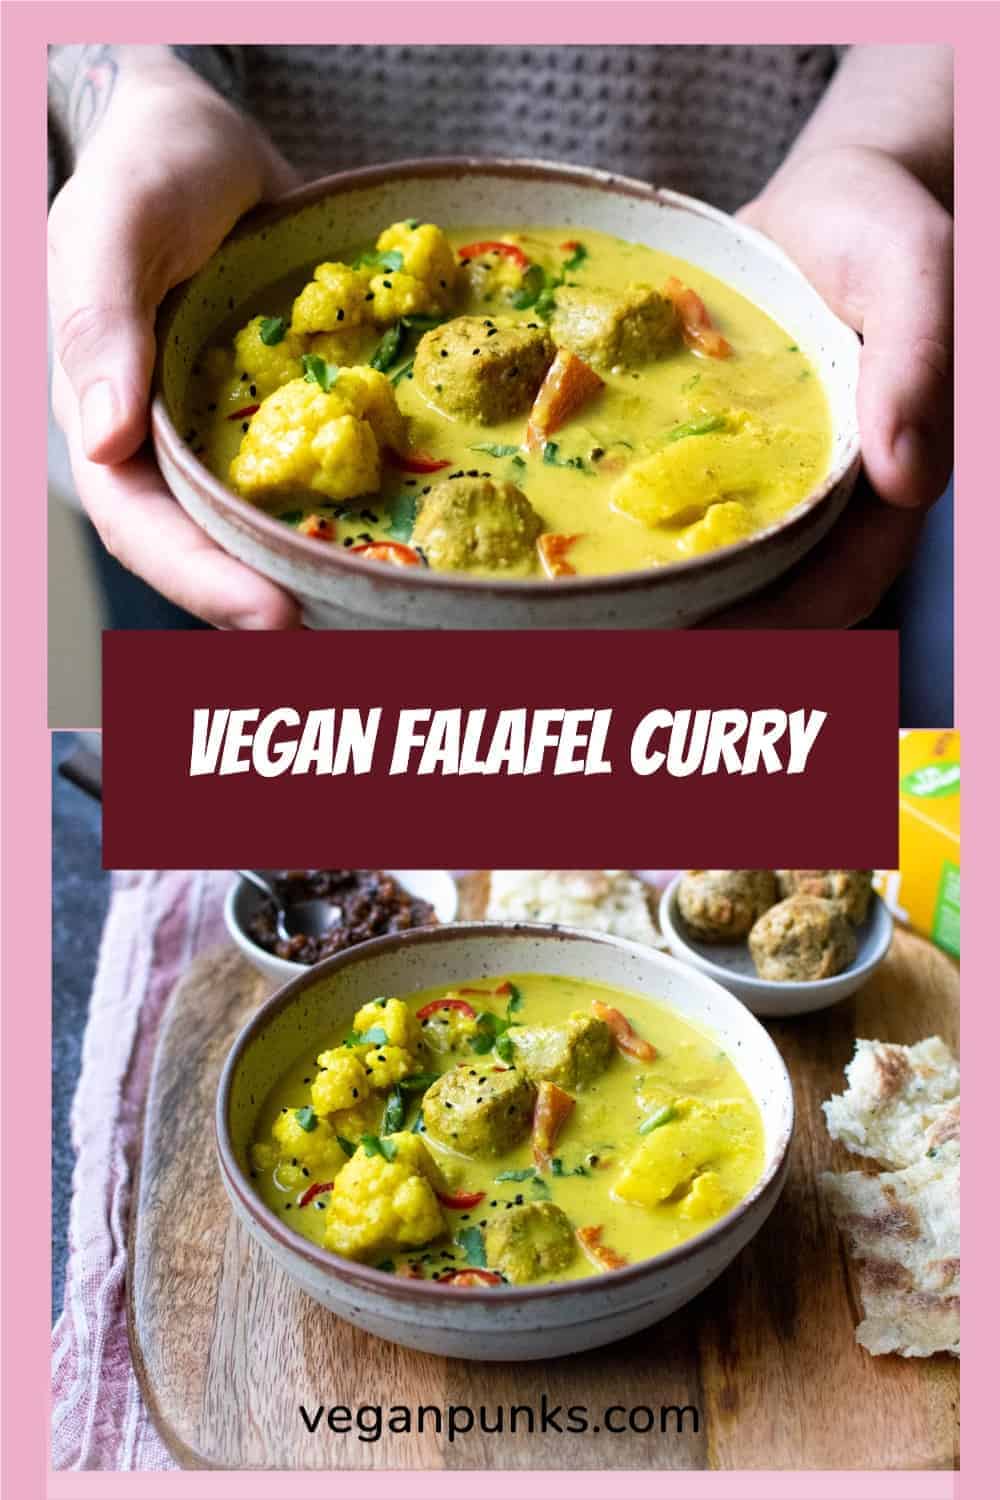 Pinterest image with the title 'Vegan Falafel Curry' showing two images one above the other of a yellow falafel curry with korma sauce